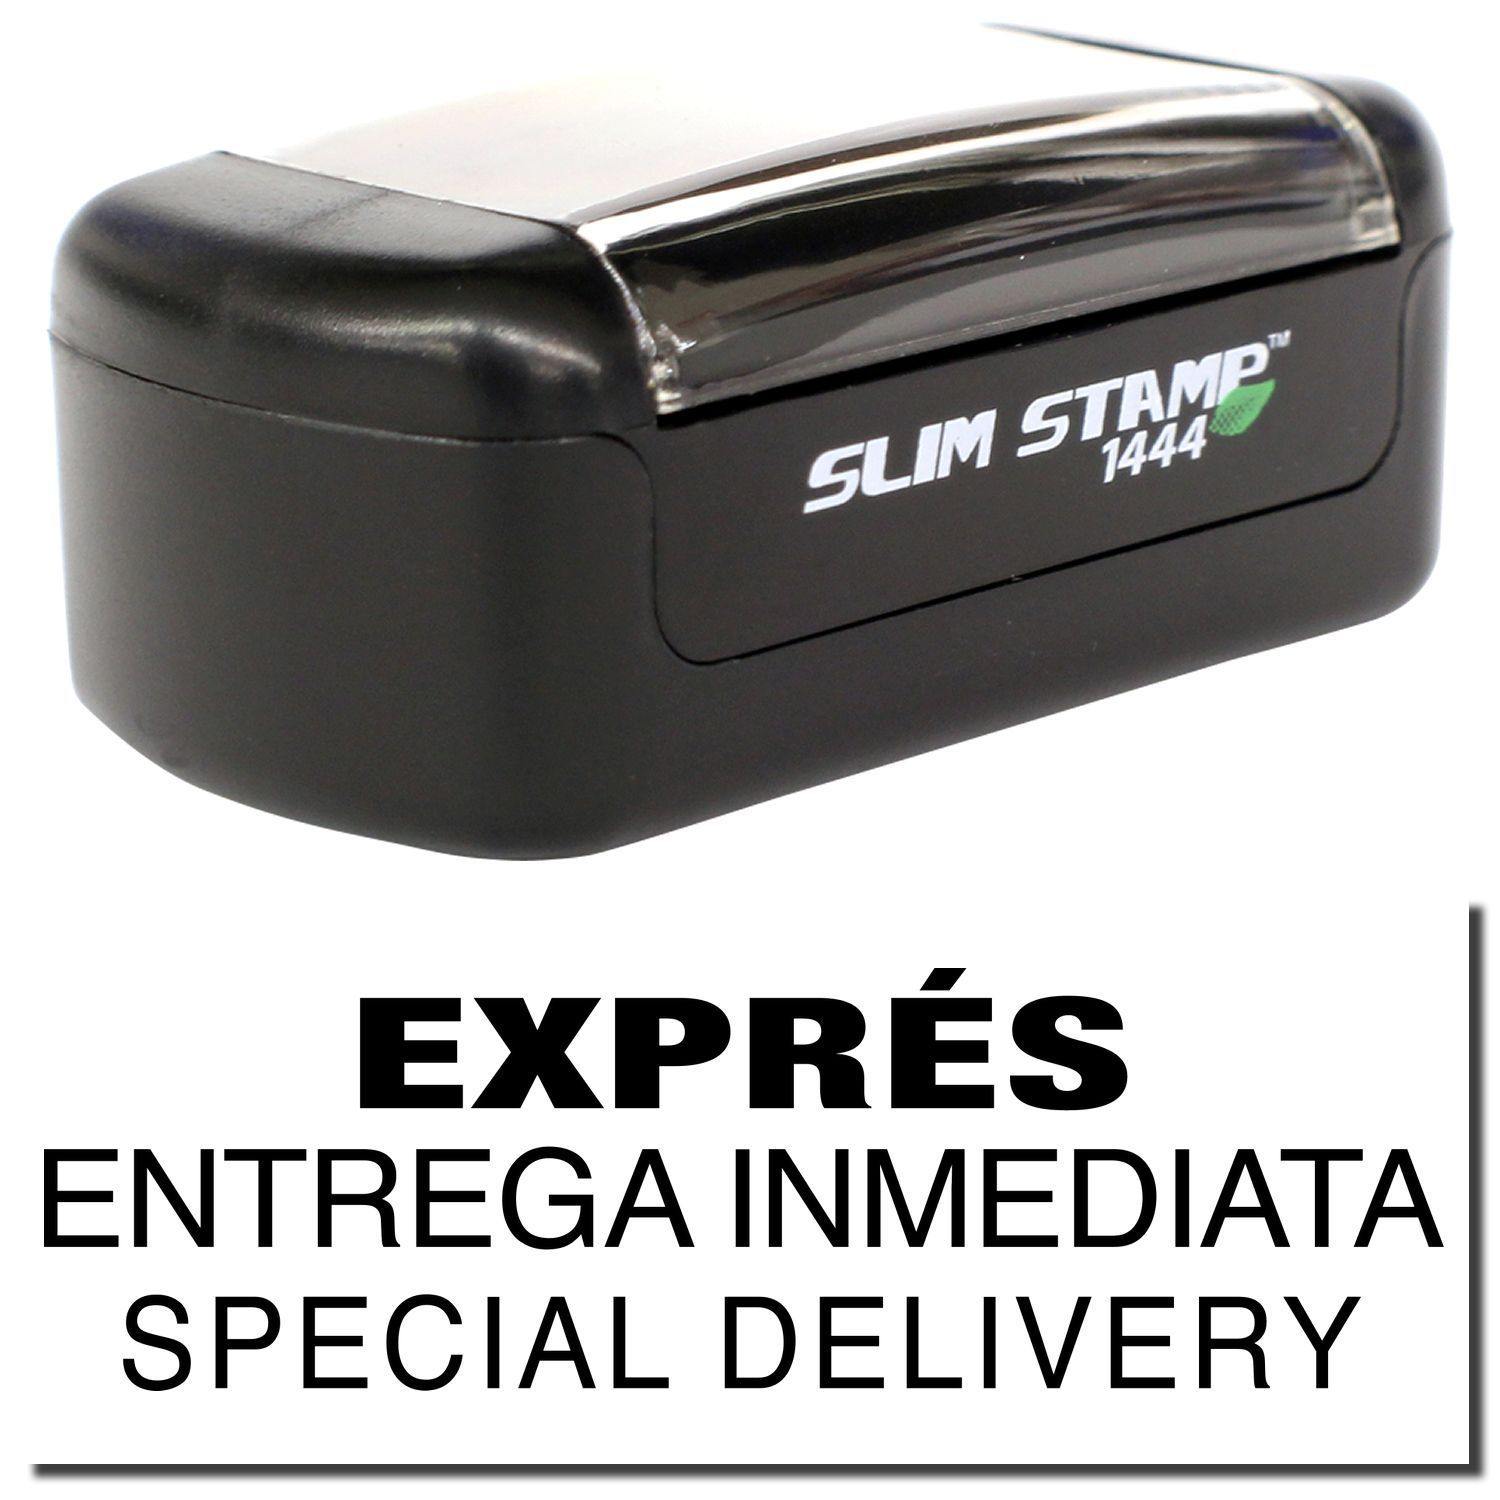 A stock office pre-inked stamp with a stamped image showing how the text "EXPRES ENTREGA INMEDIATA SPECIAL DELIVERY" is displayed after stamping.